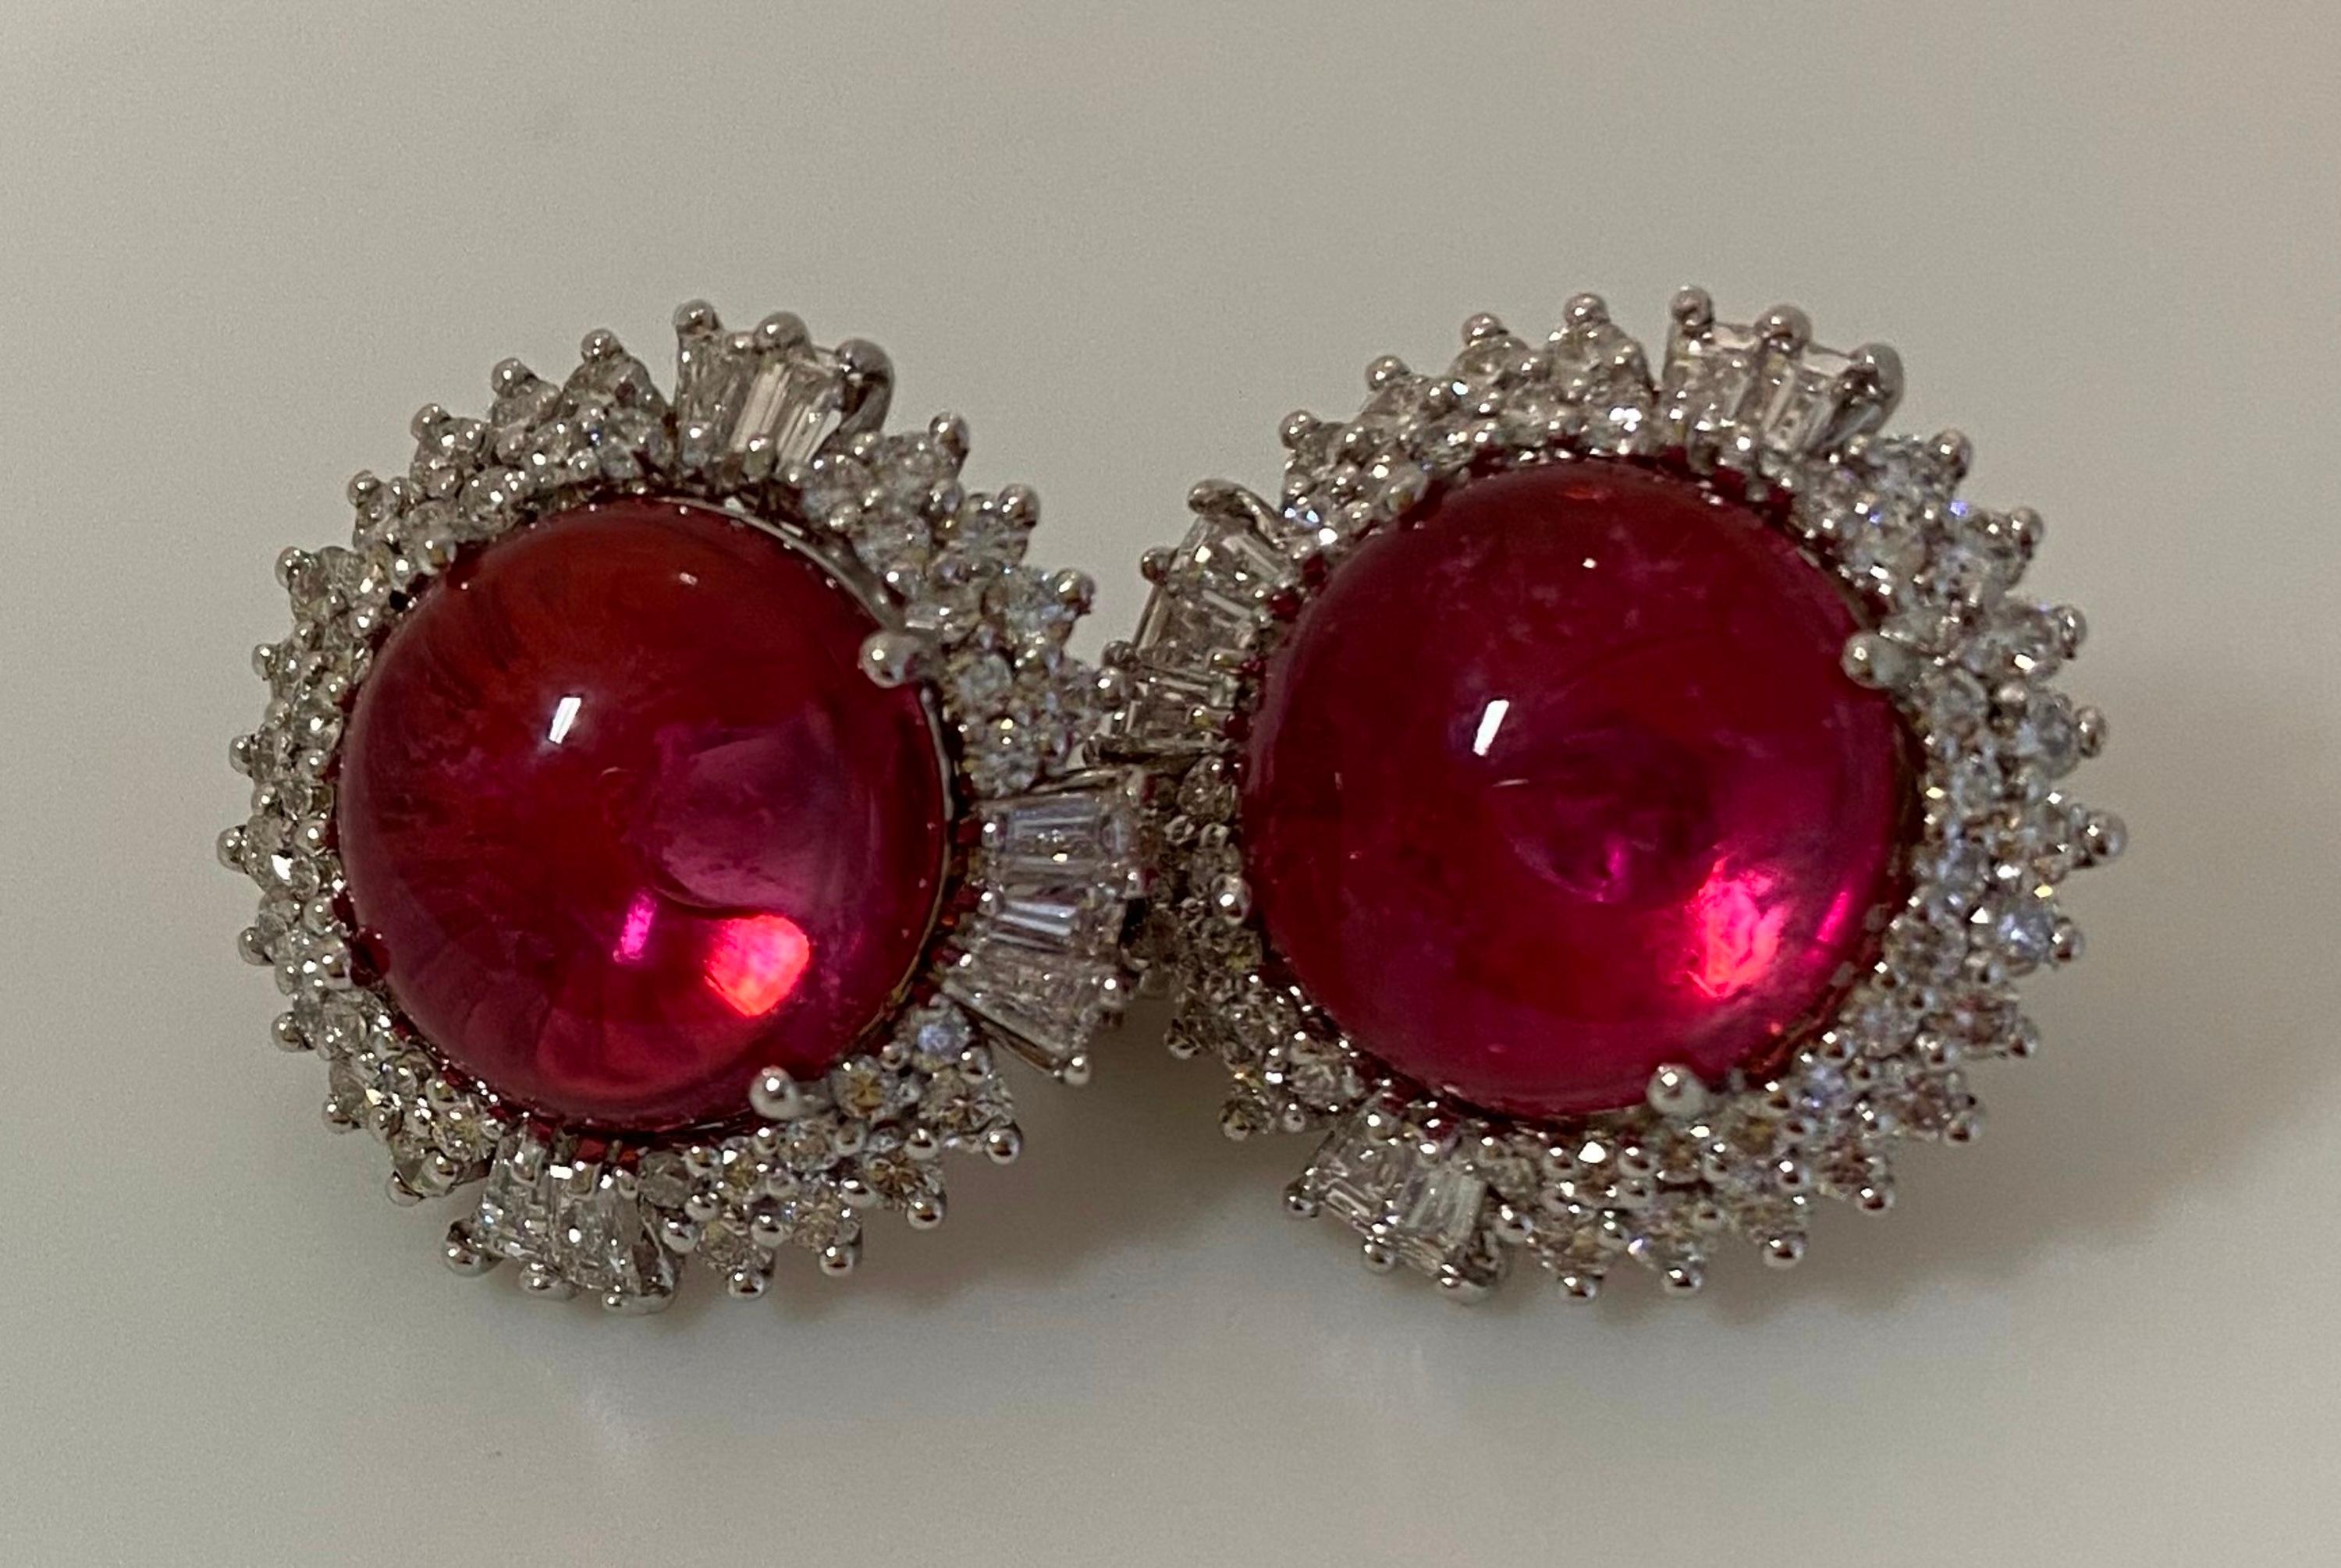 18 Karat White Gold Diamond  and Tourmaline  Stud Earrings

84 Diamonds 1,03 Carat
2  Tourmaline 8,00 Carat





Founded in 1974, Gianni Lazzaro is a family-owned jewelery company based out of Düsseldorf, Germany.
Although rooted in Germany, Gianni